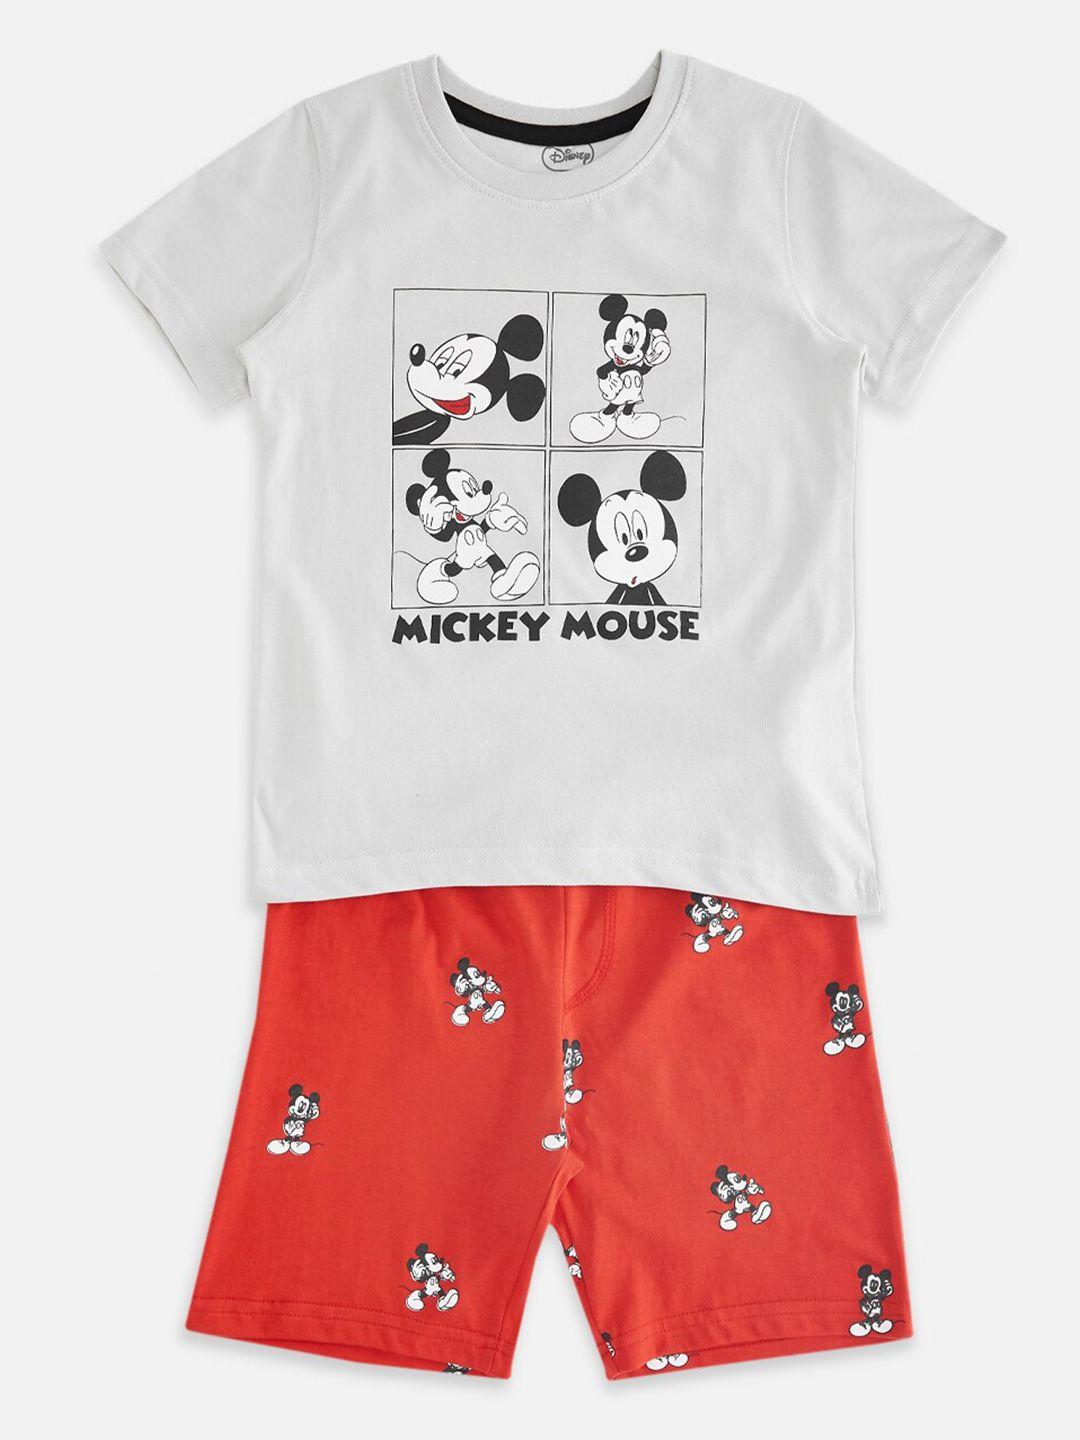 pantaloons-junior-boys-mickey-mouse-printed-pure-cotton-t-shirt-with-shorts